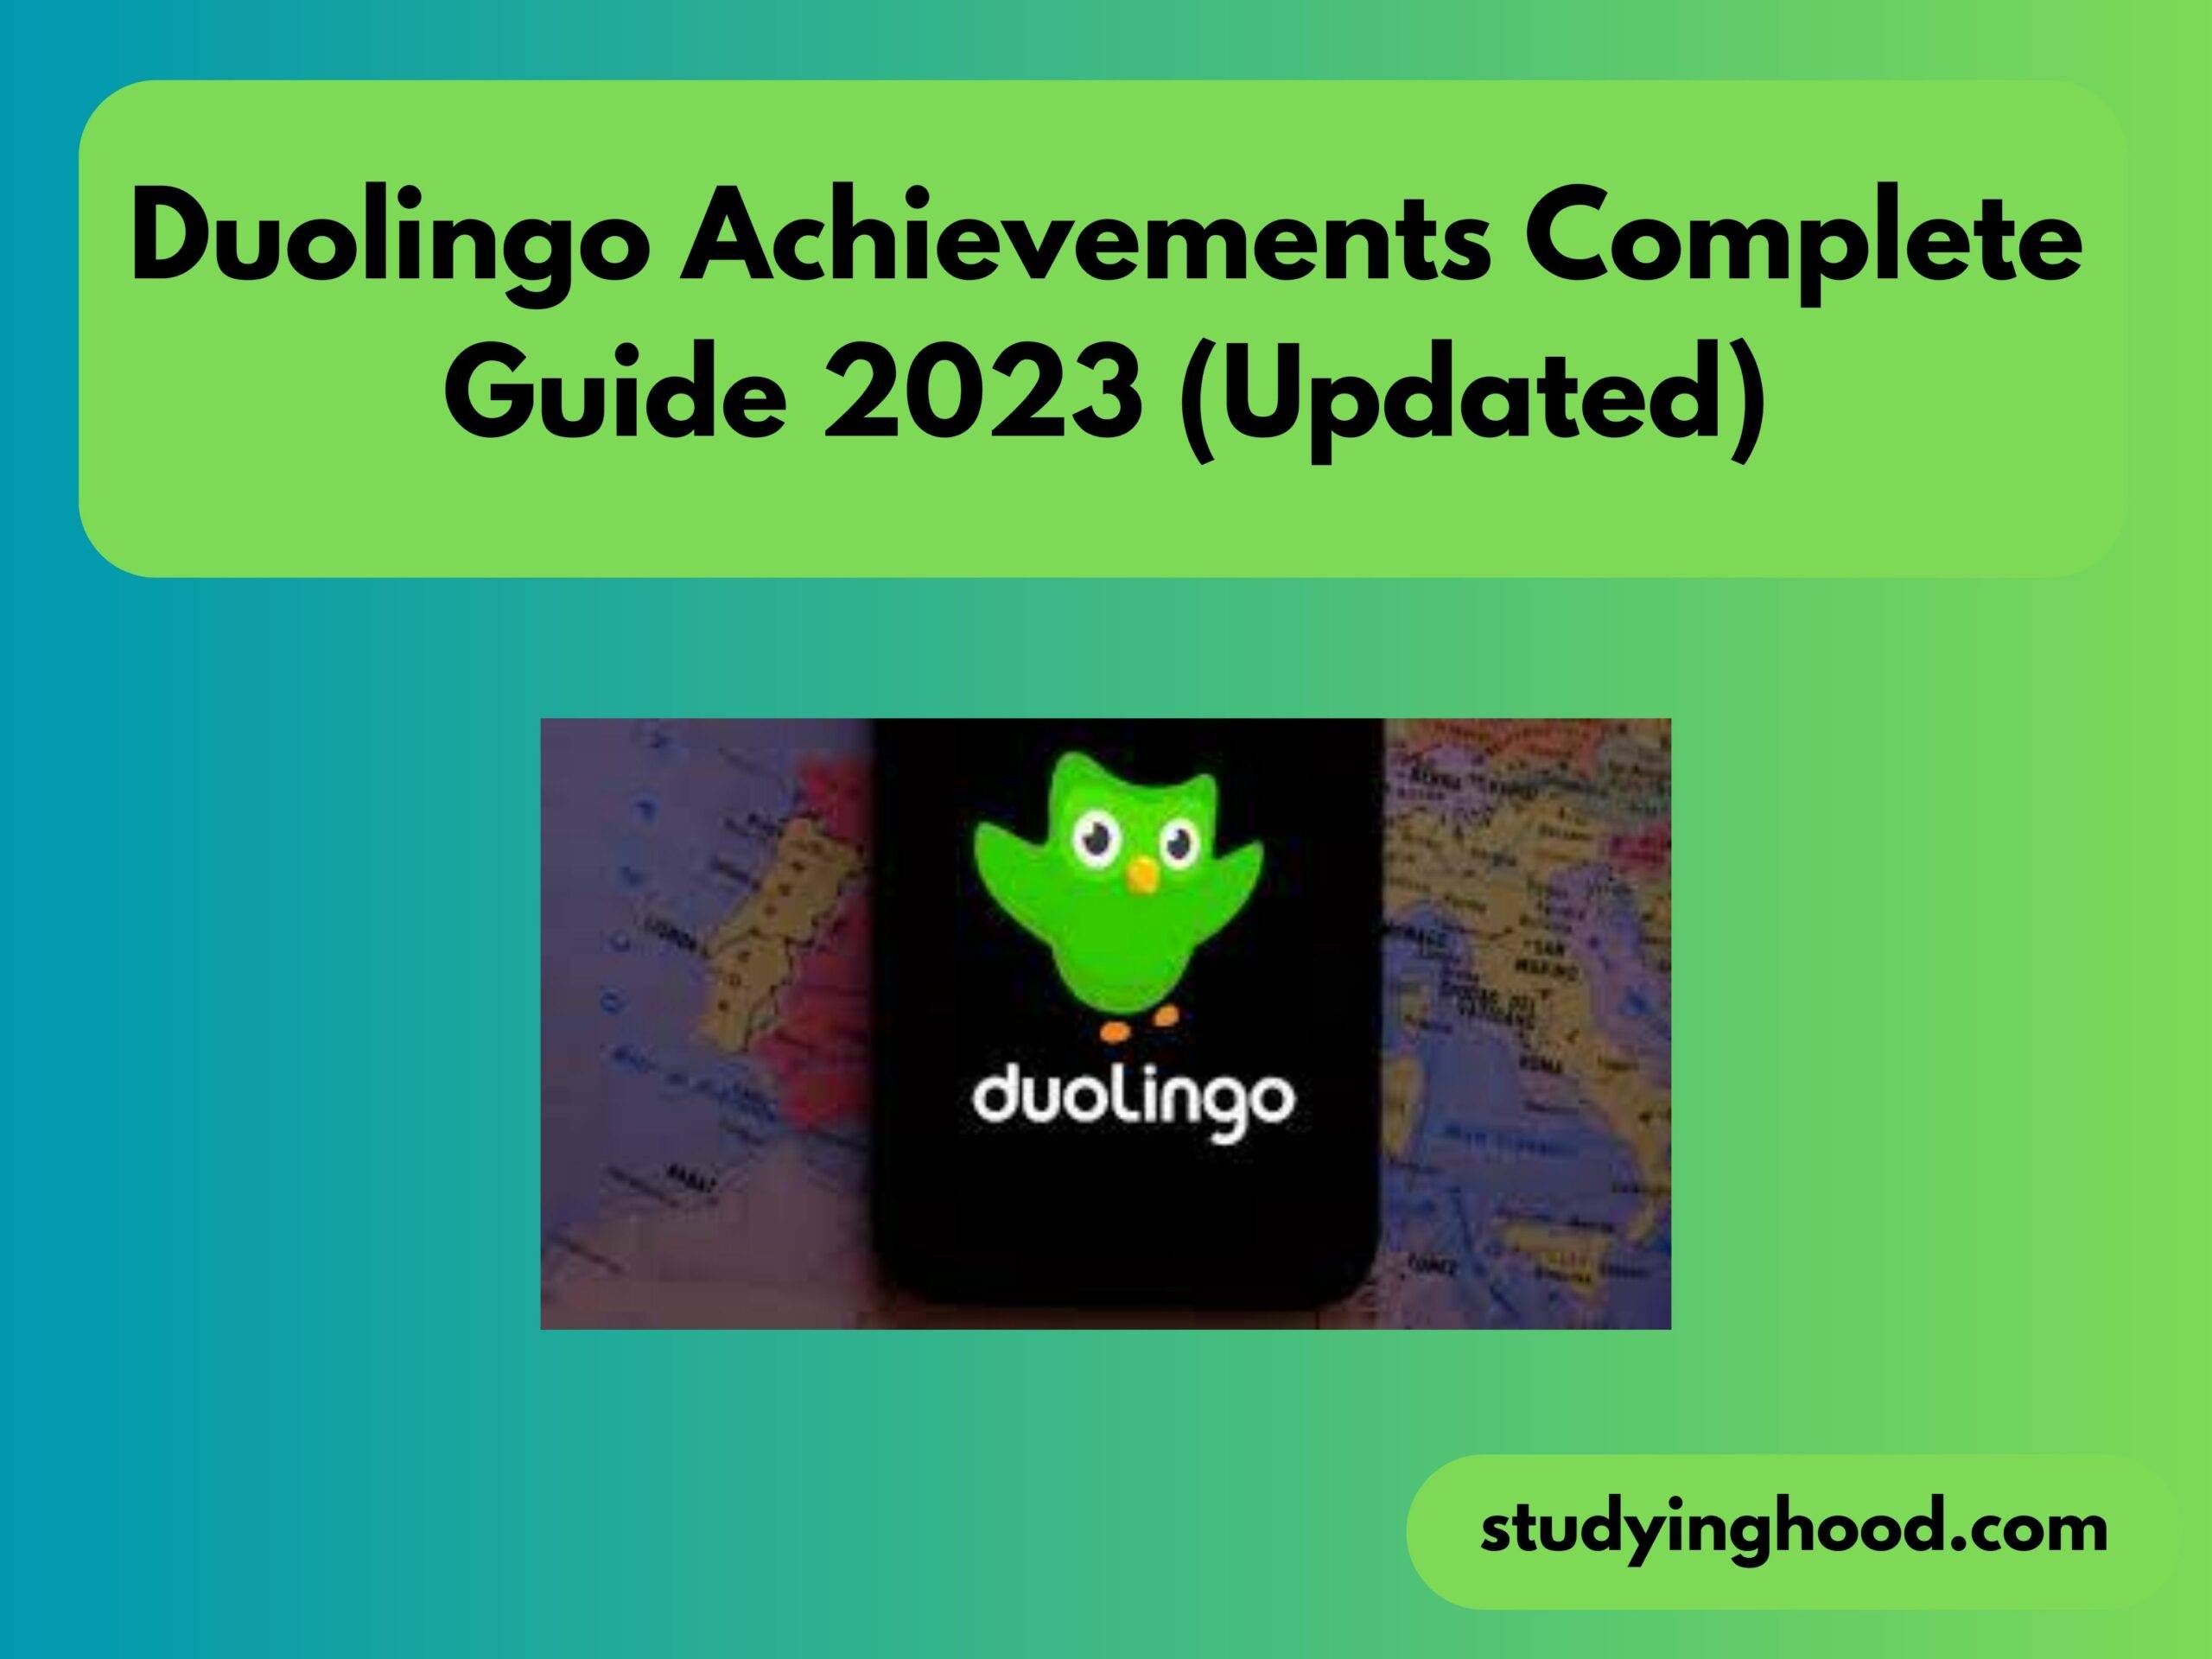 Duolingo Achievements Complete Guide 2023 (Updated)